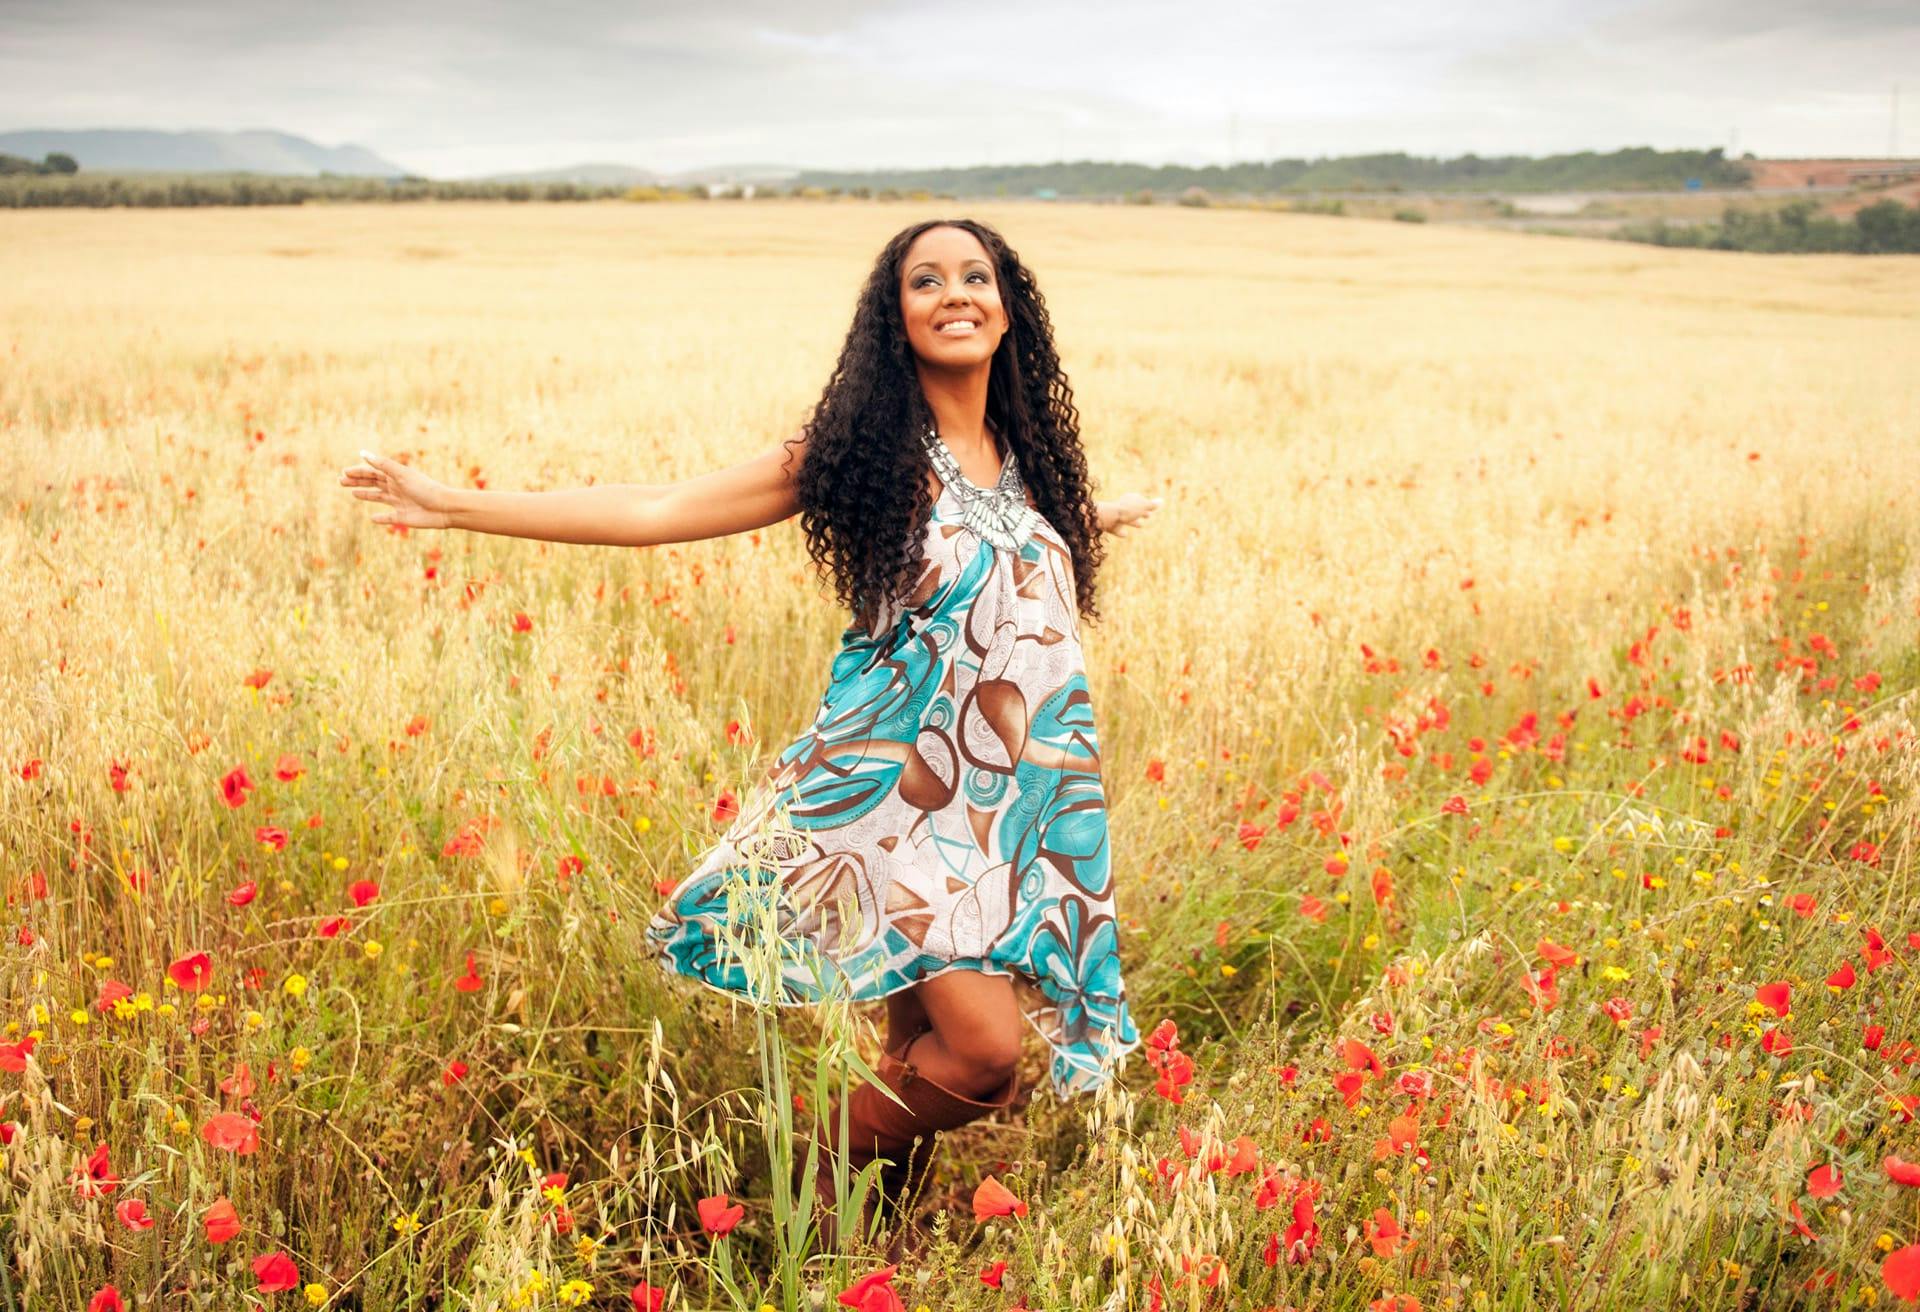 Smiling woman frolicking in field.